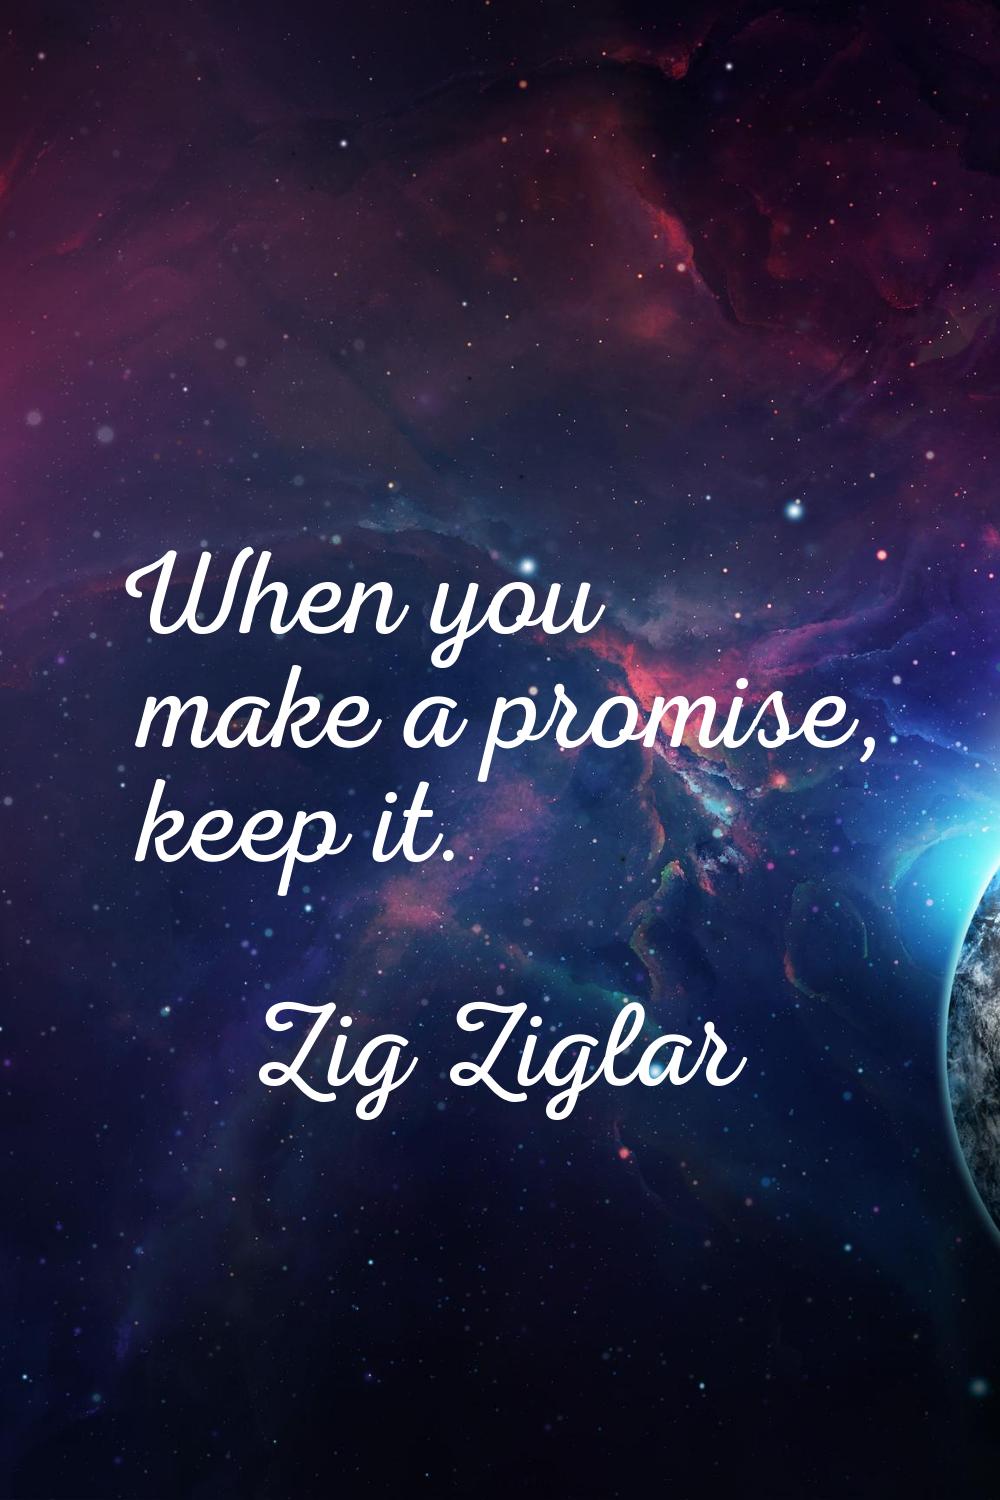 When you make a promise, keep it.